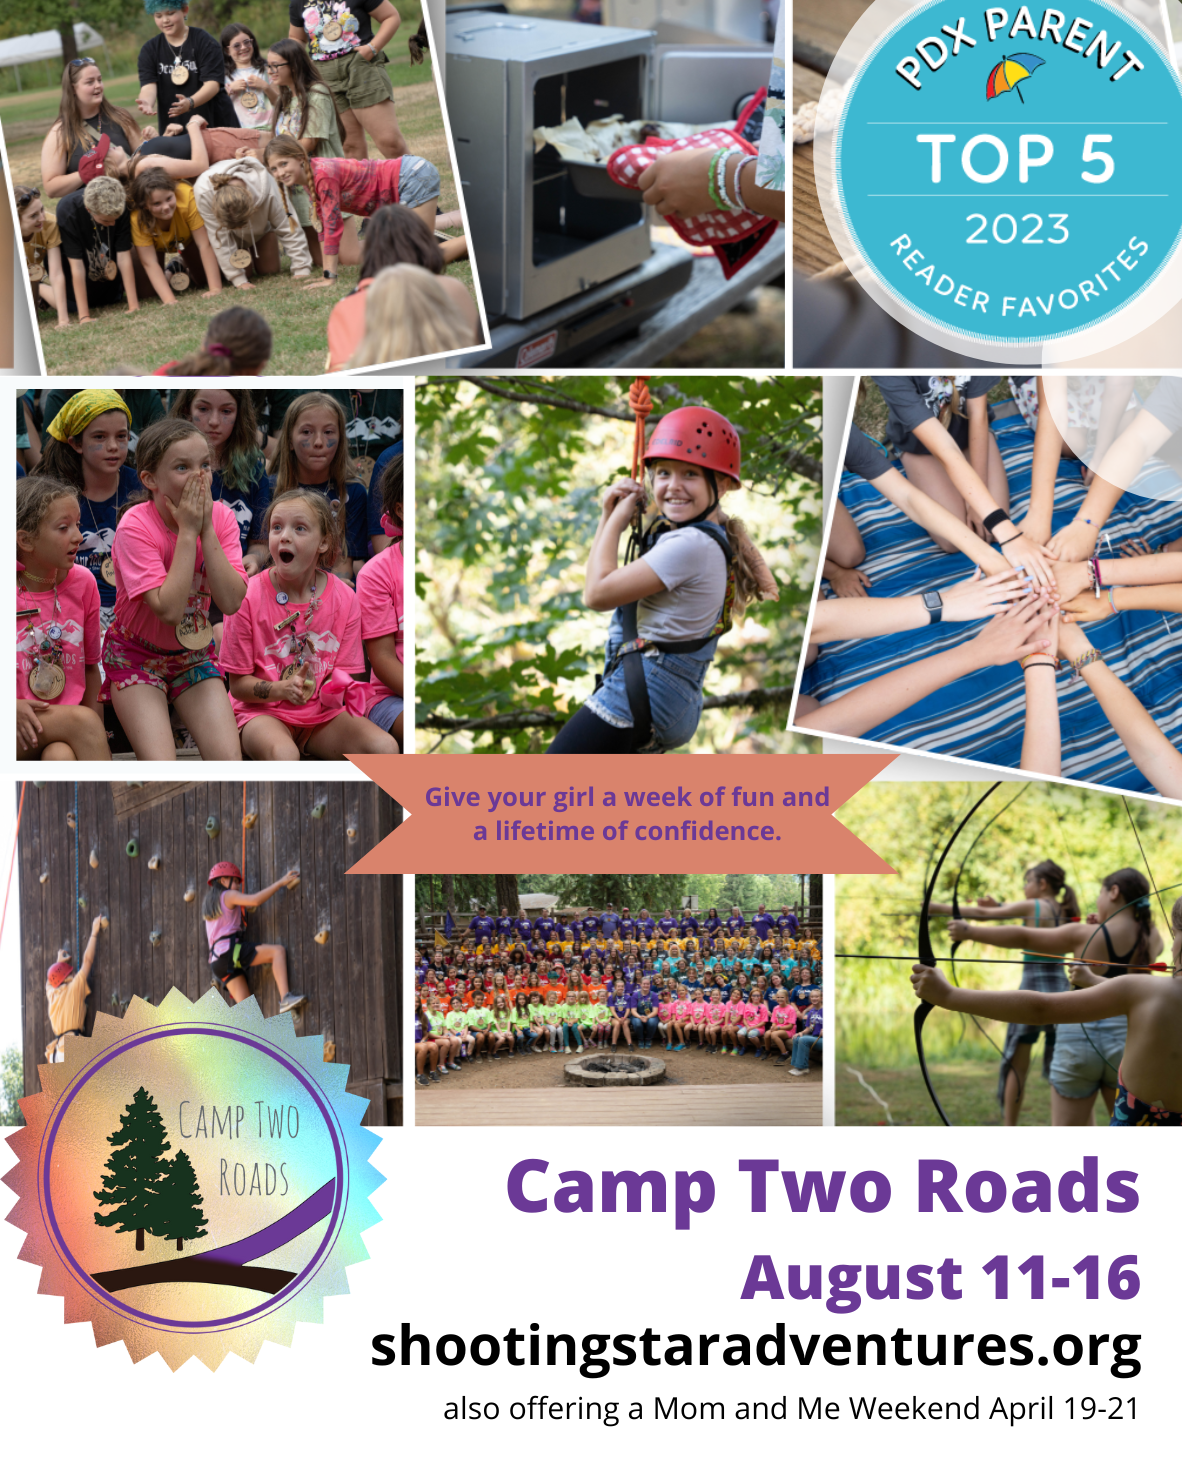 Camp Two Roads